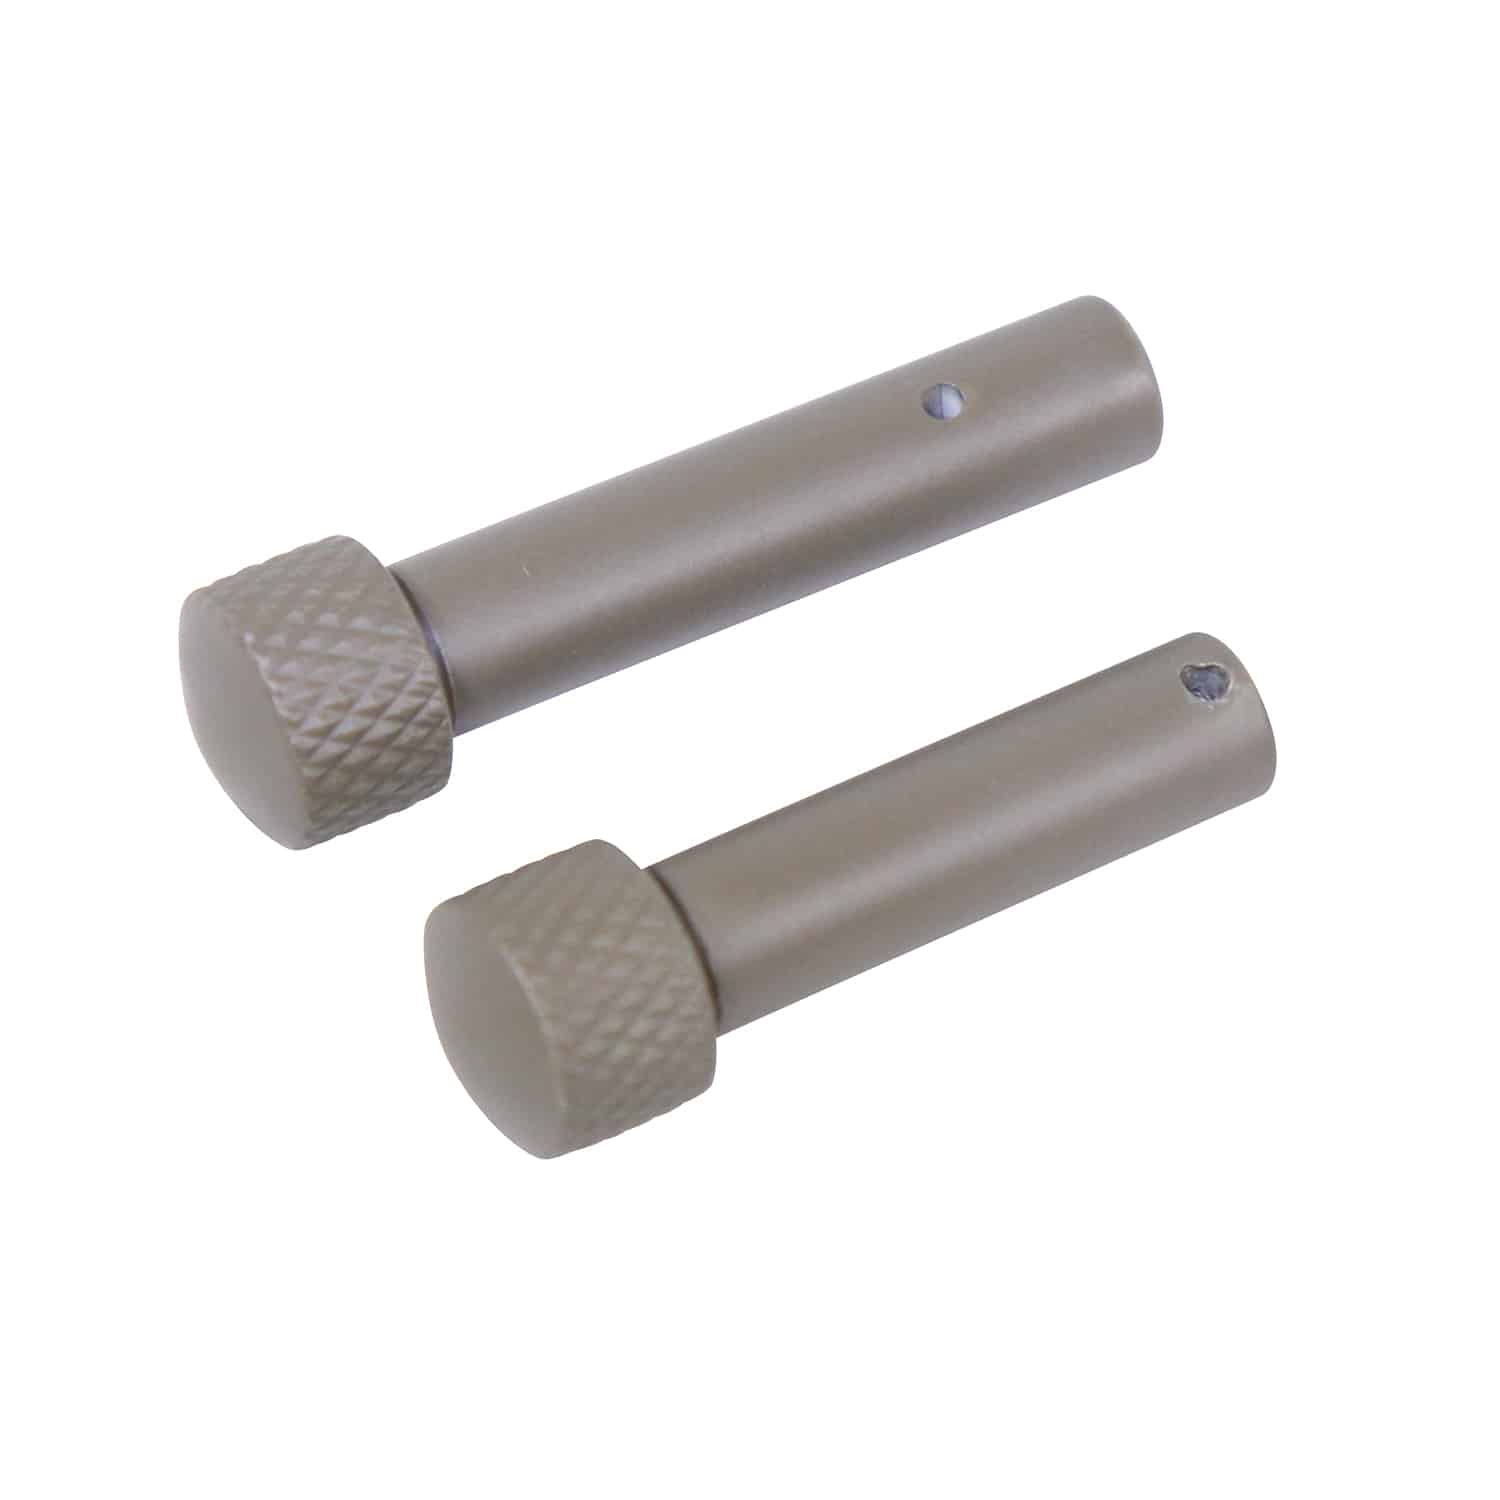 AR-15 5.56 Cal Extended Takedown Pin Set Gen 2 in FDE